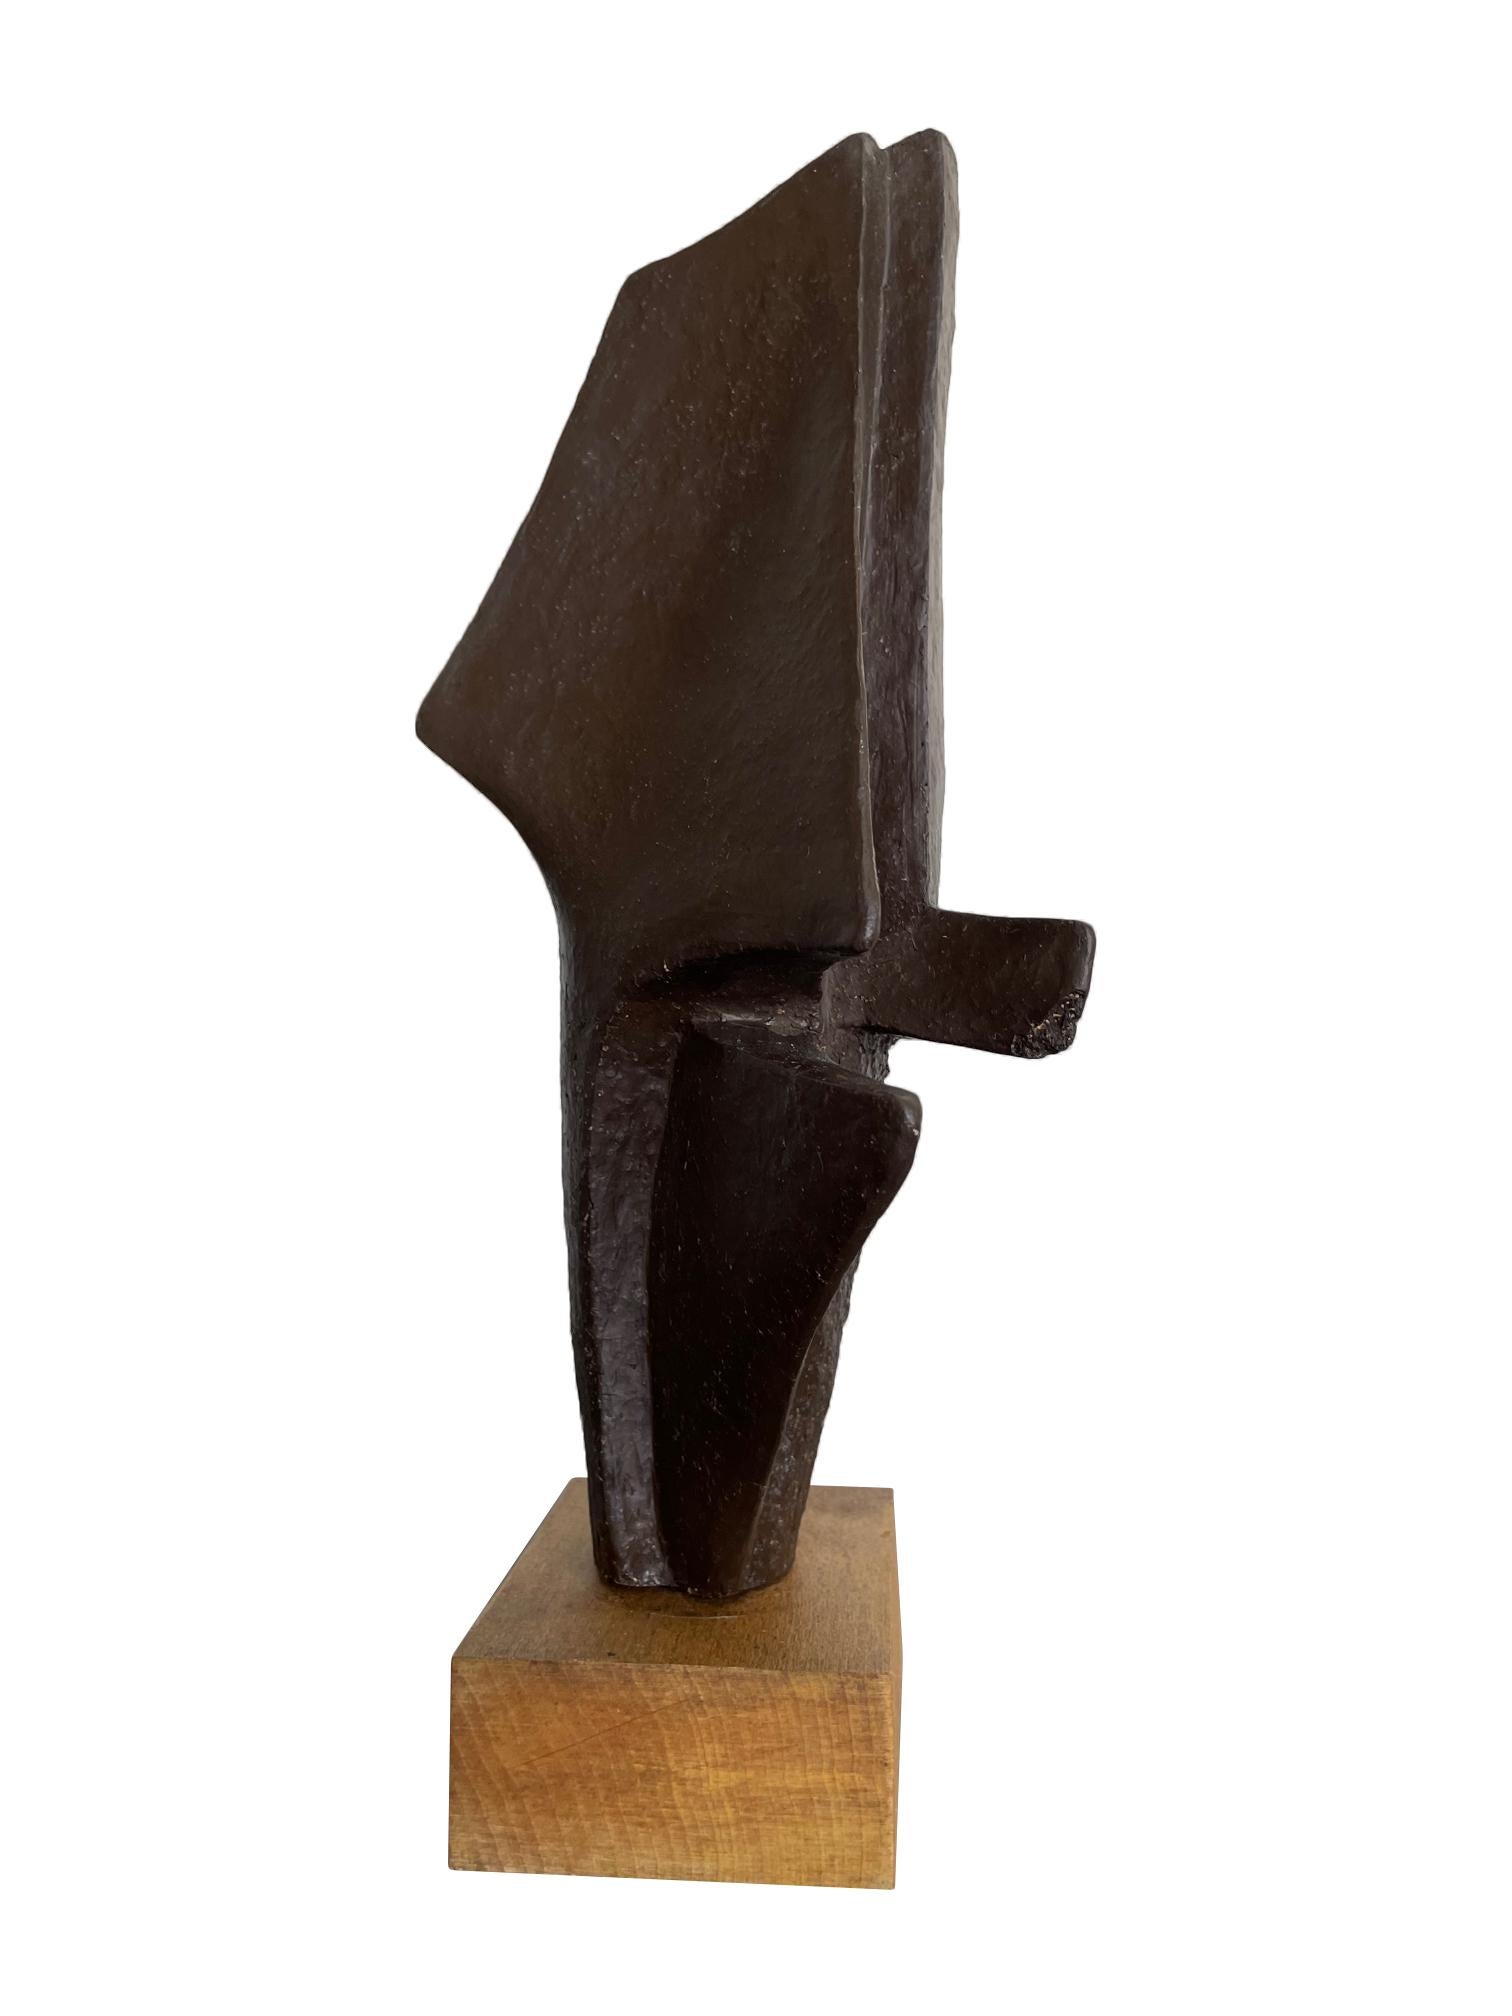 A 1960s Belgian ceramic abstract sculpture with bronze textured style finish mounted on natural wooden base, signed on the base 